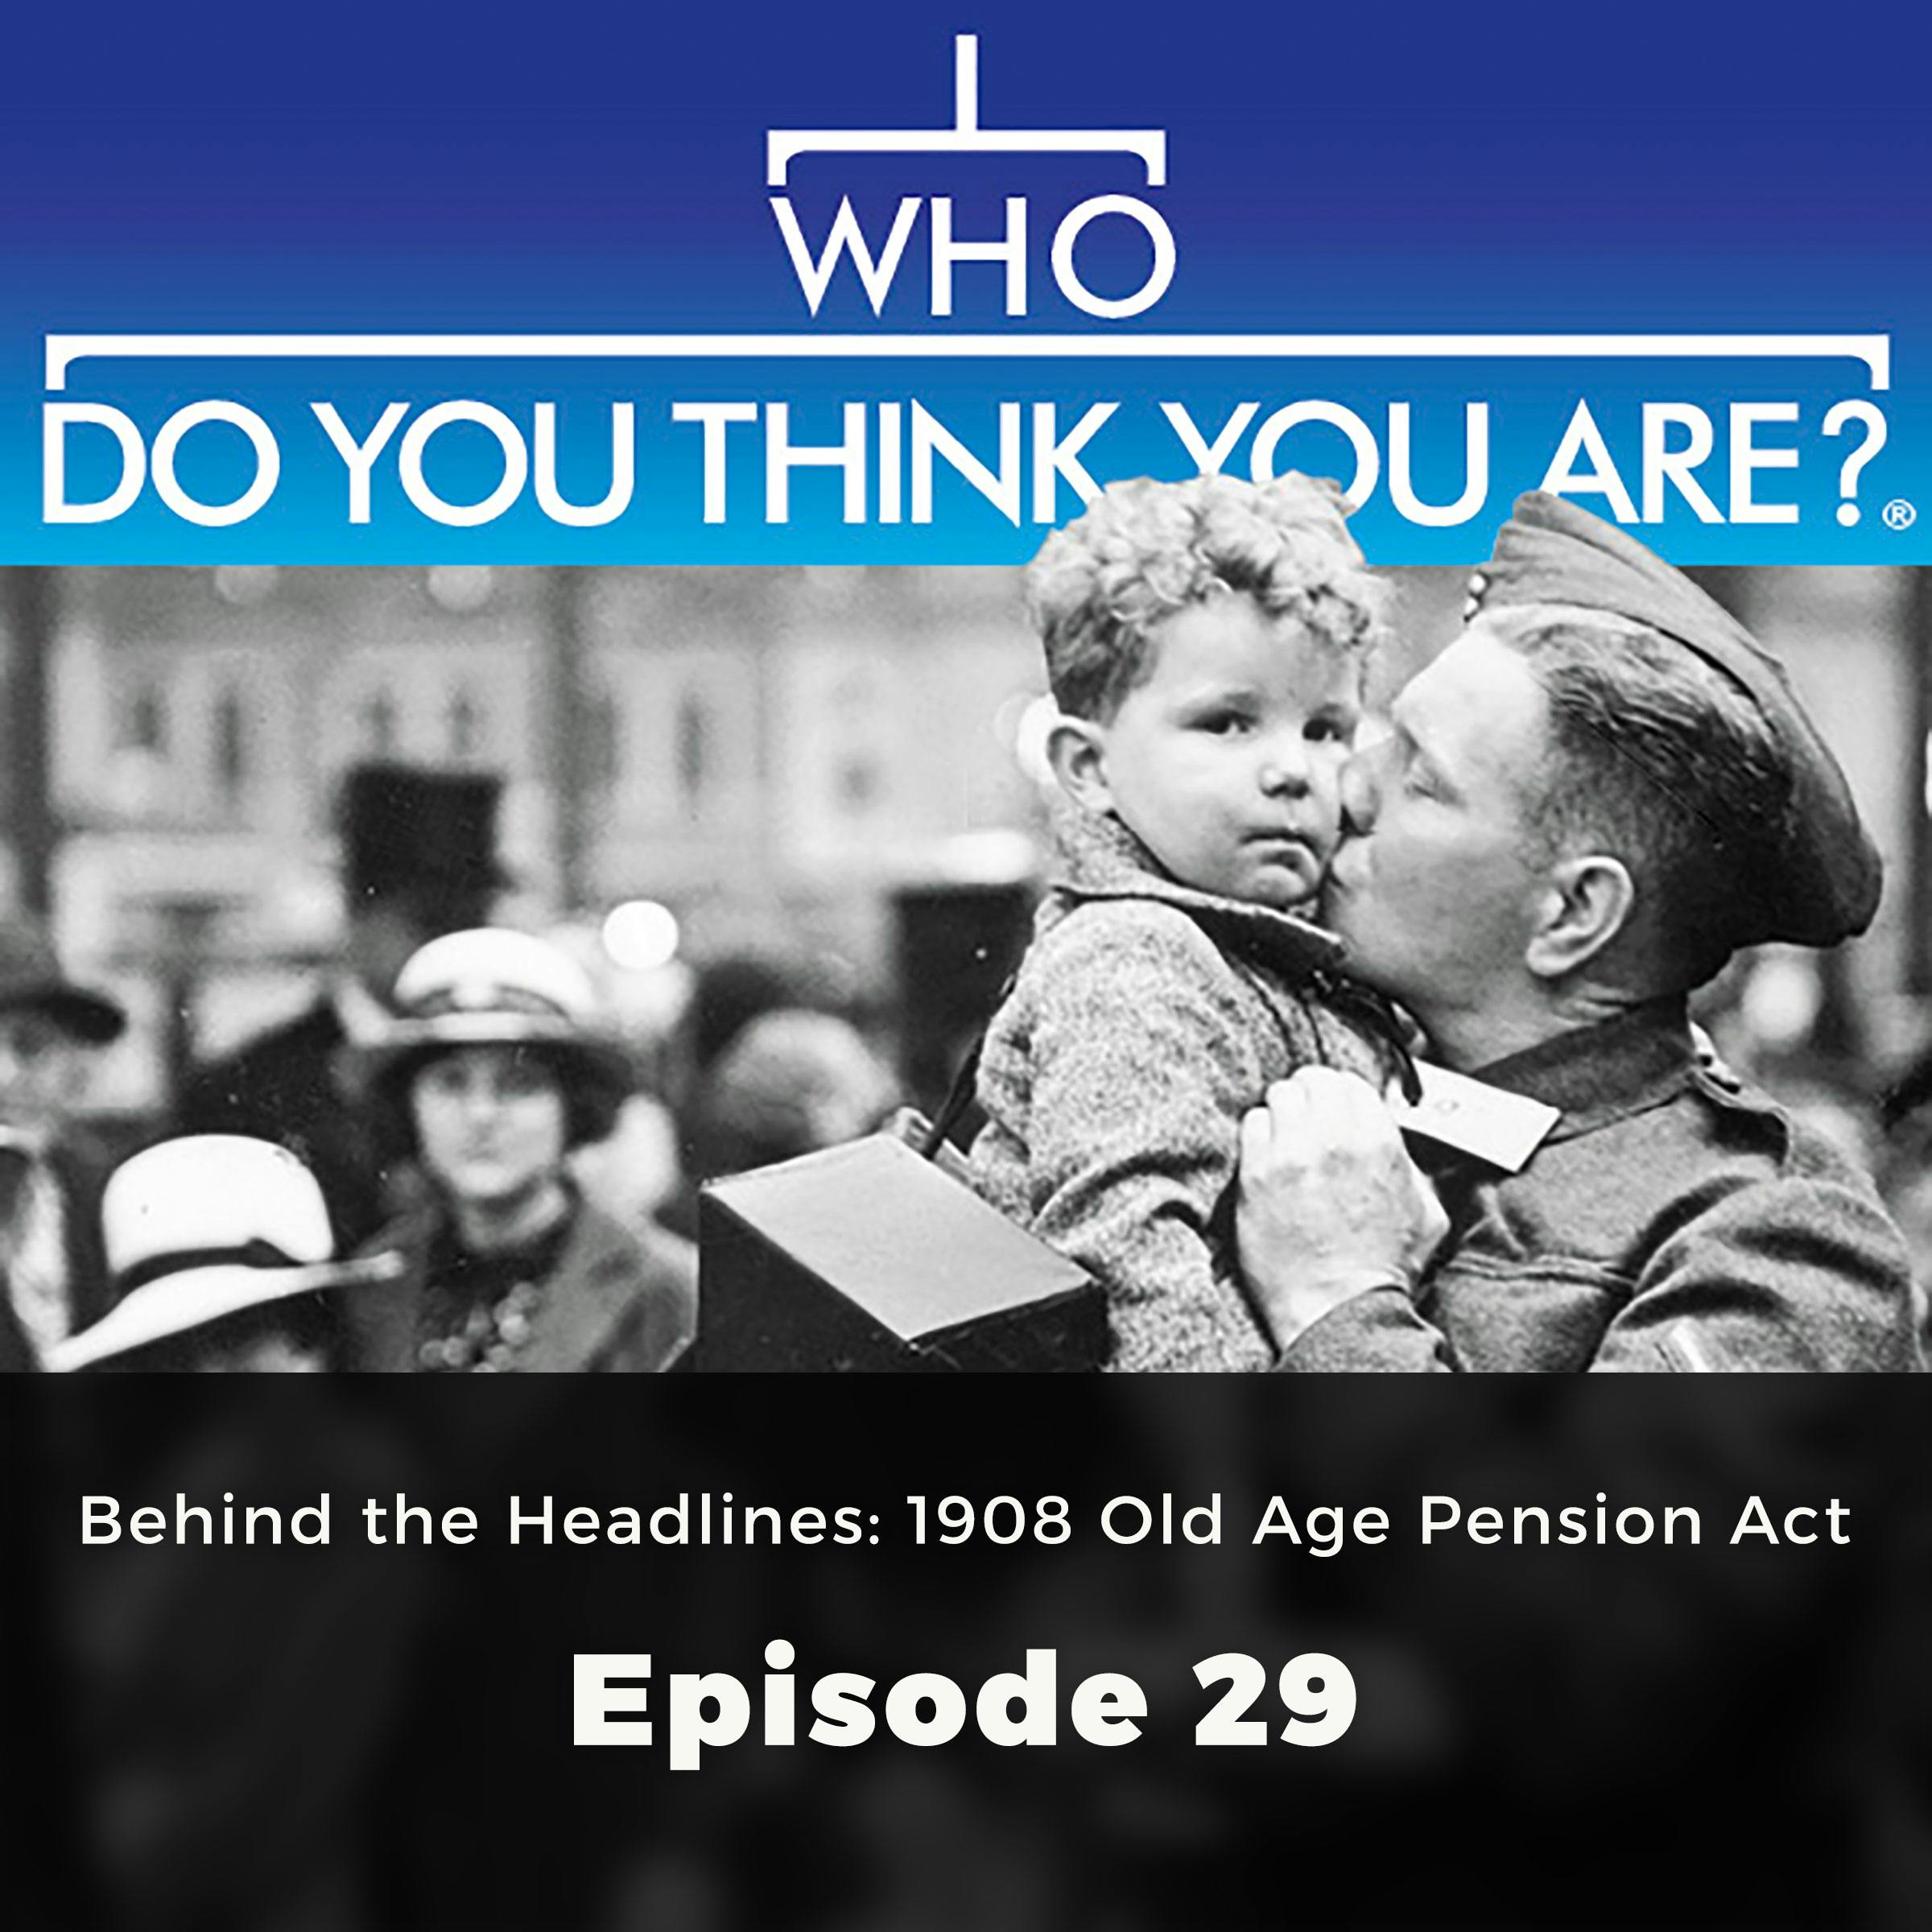 Who Do You Think You Are? Behind the Headlines: 1908 Old Age Pension Act: Episode 29 - undefined